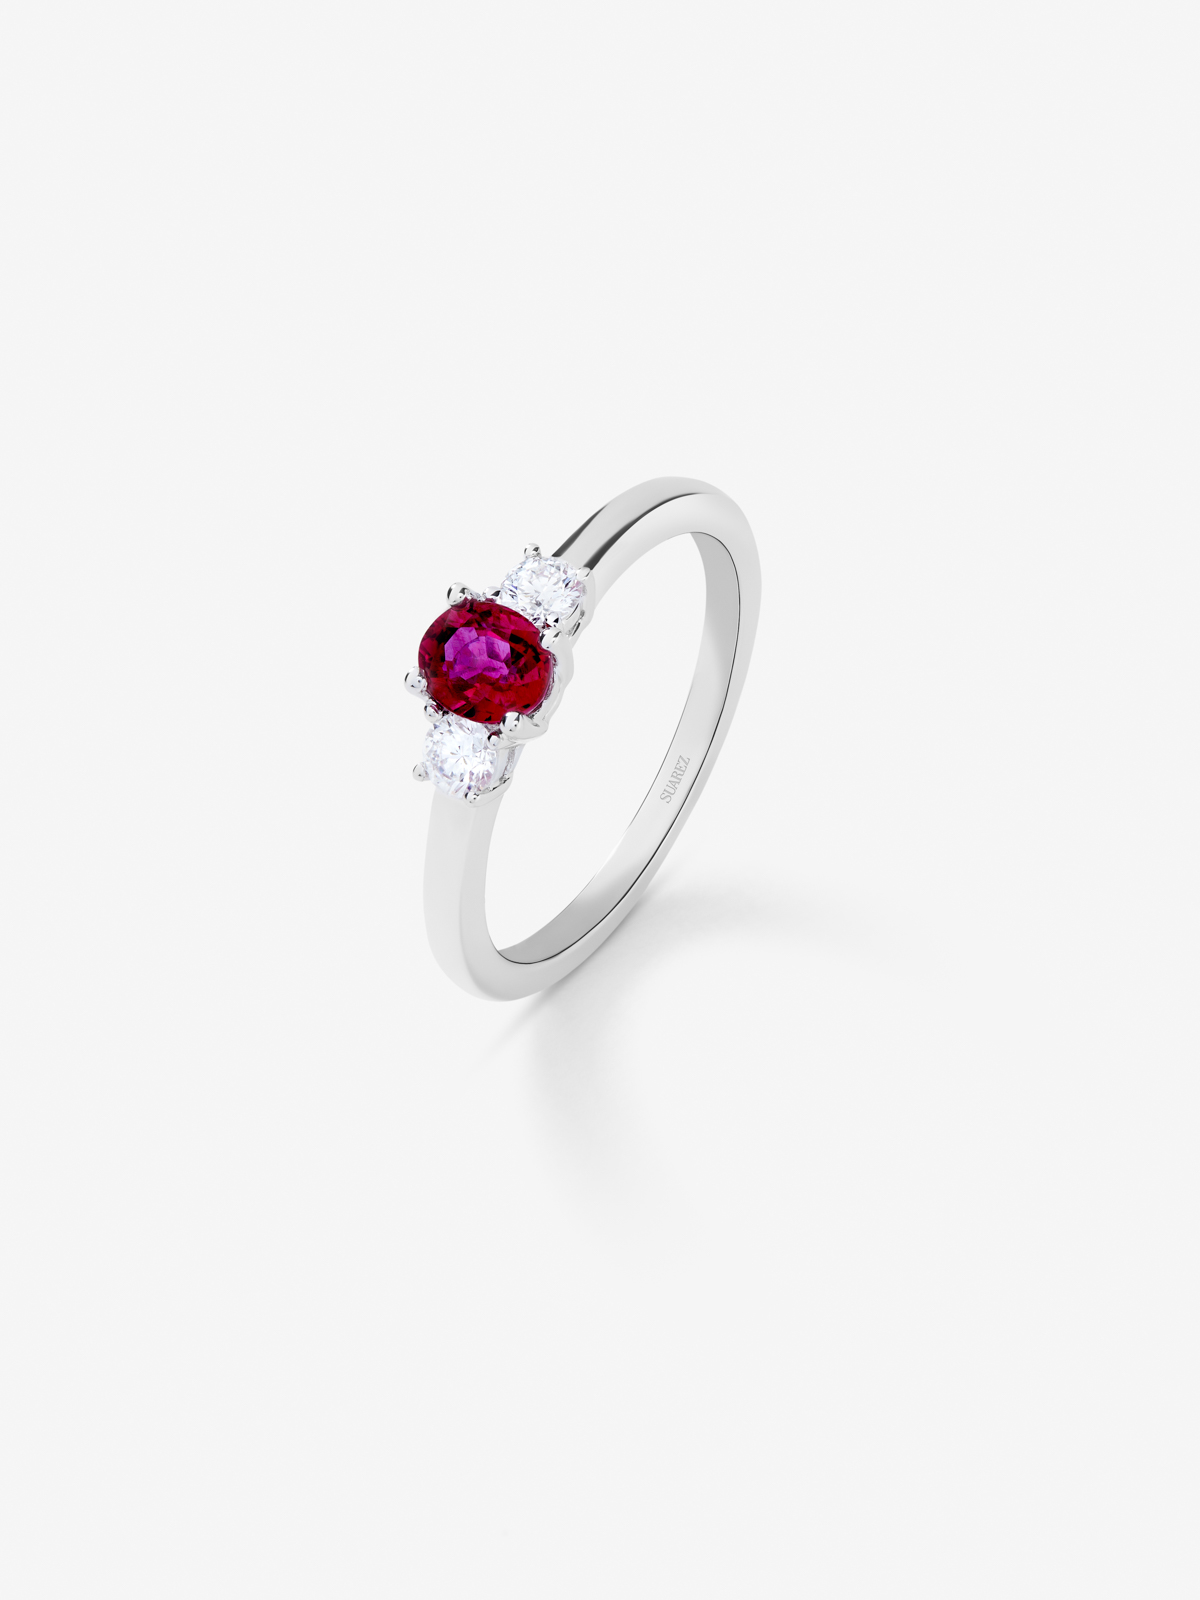 18K White Gold Time Ring with Ruby 0.45 Cts and 0.2 CTS Diamonds